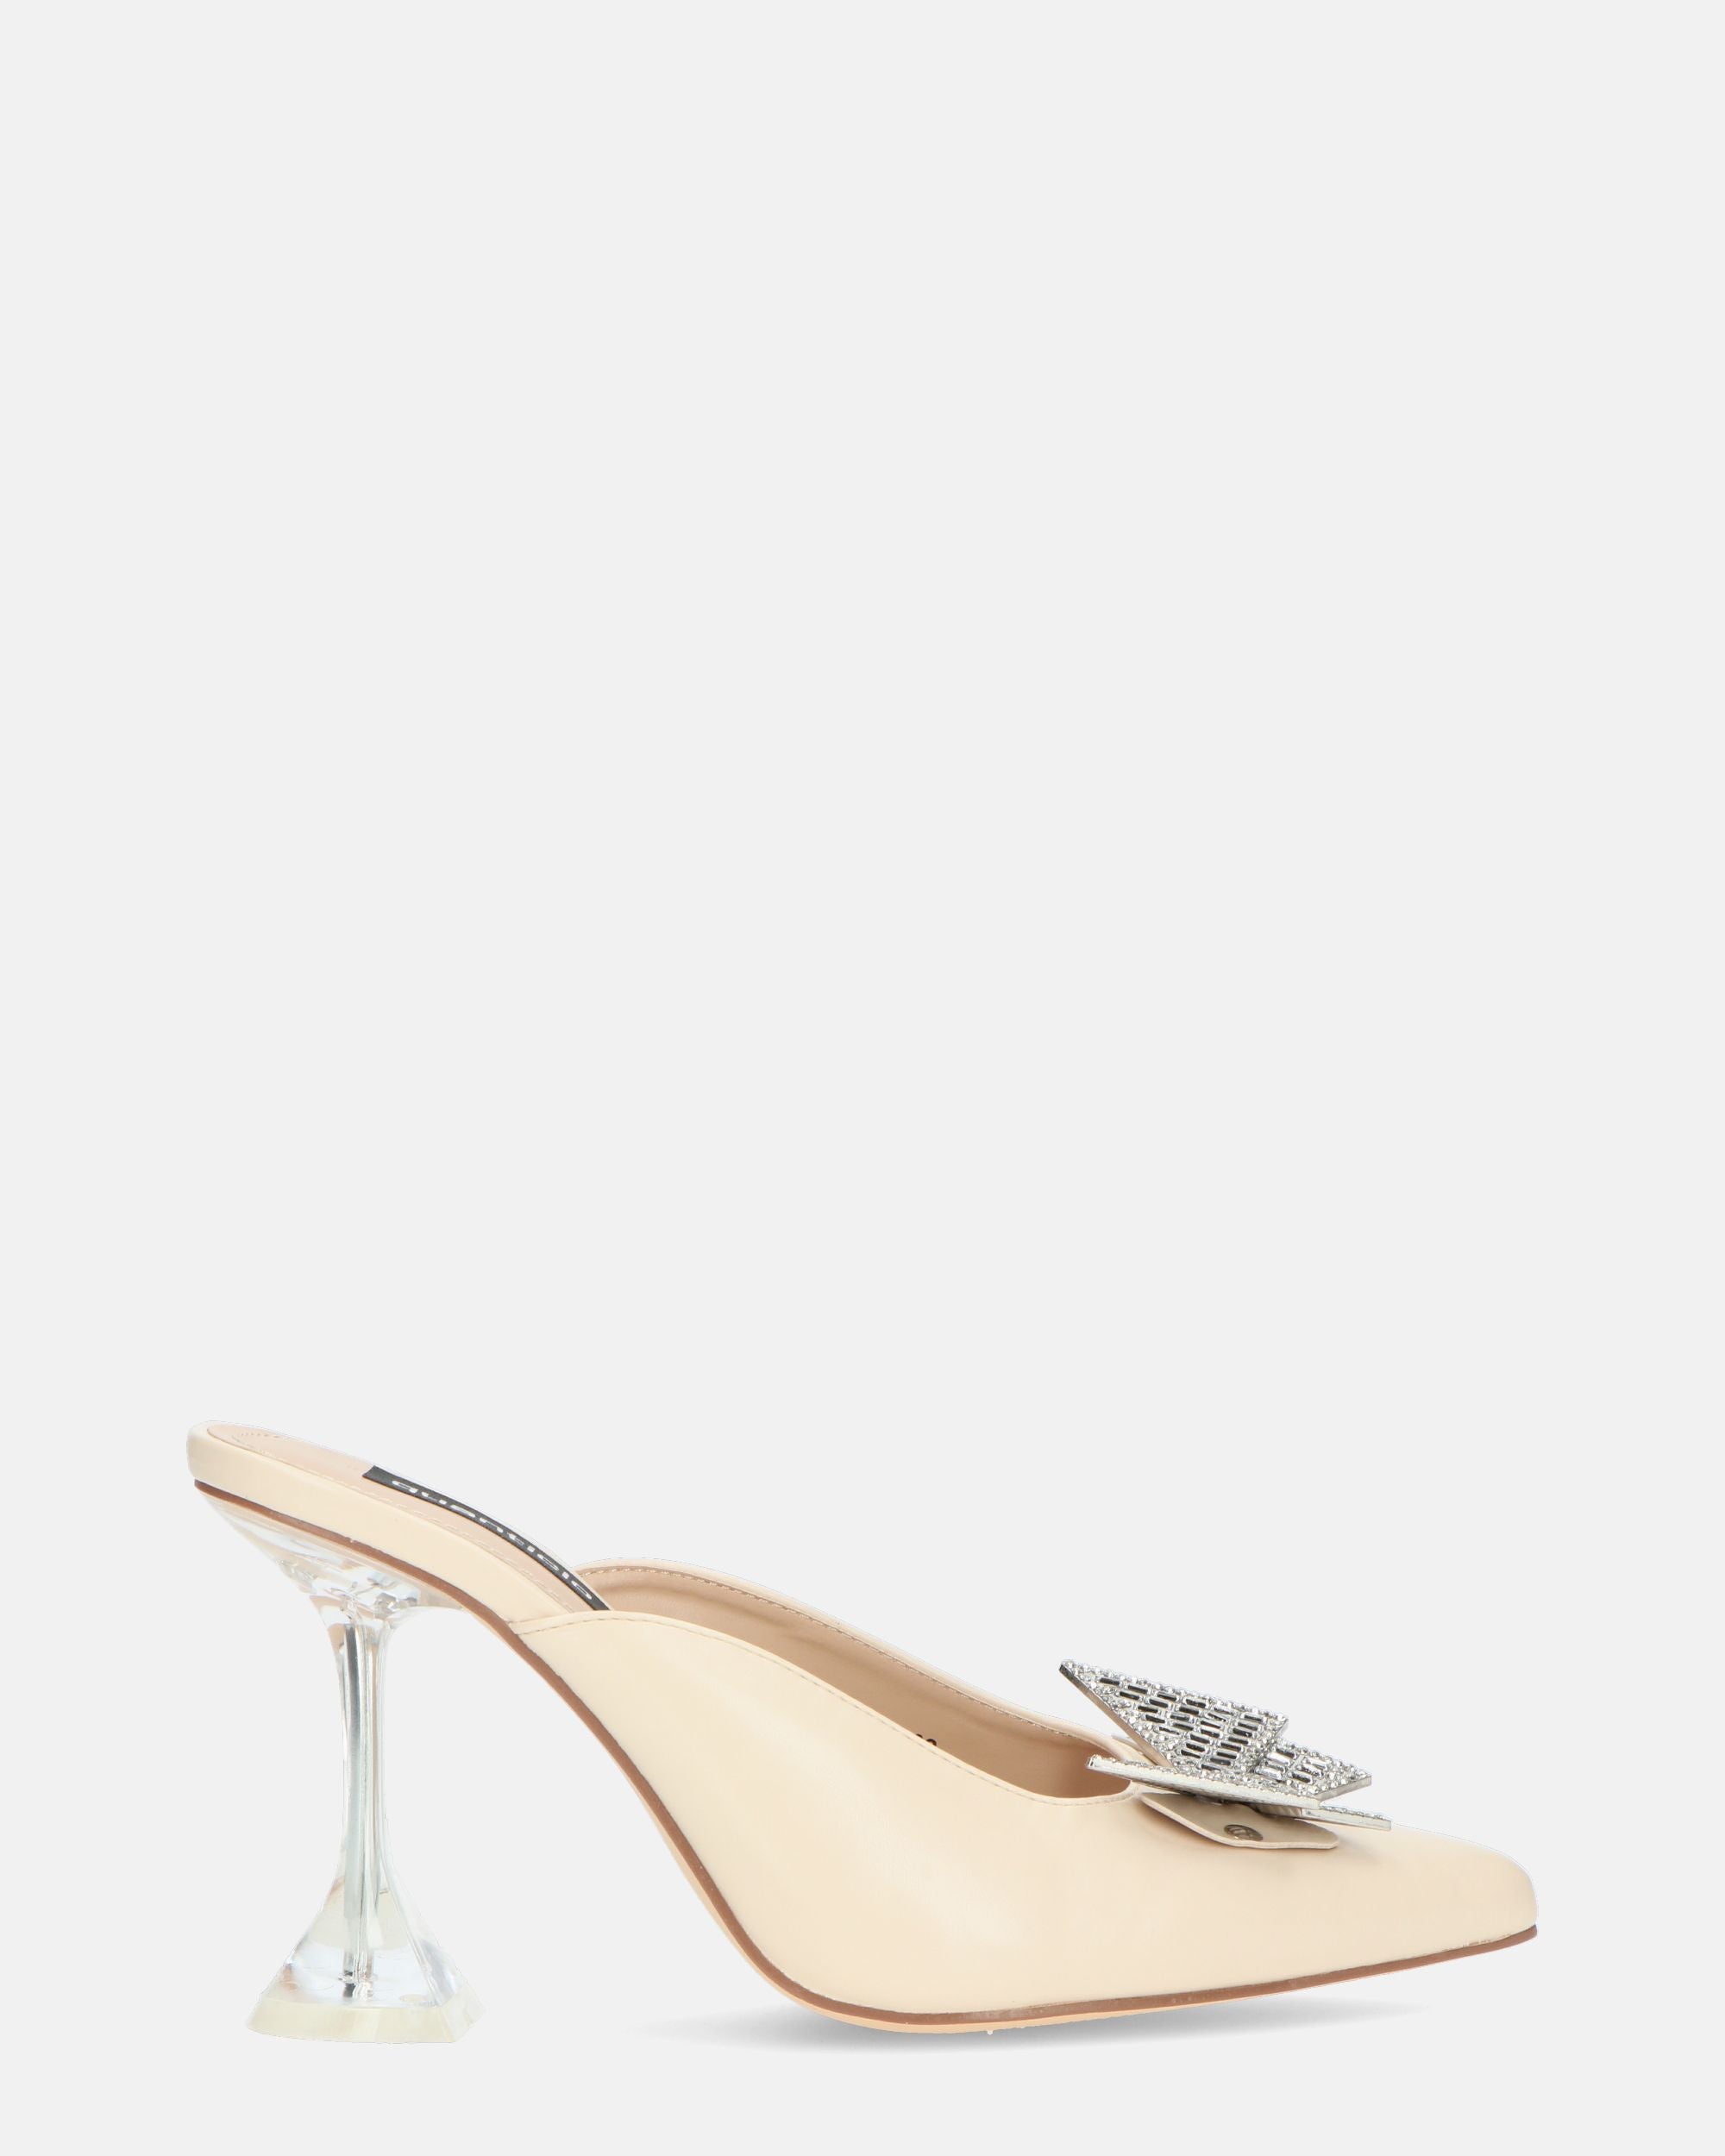 DOJA - heeled shoes in beige eco-leather with a butterfly of gems on the toe